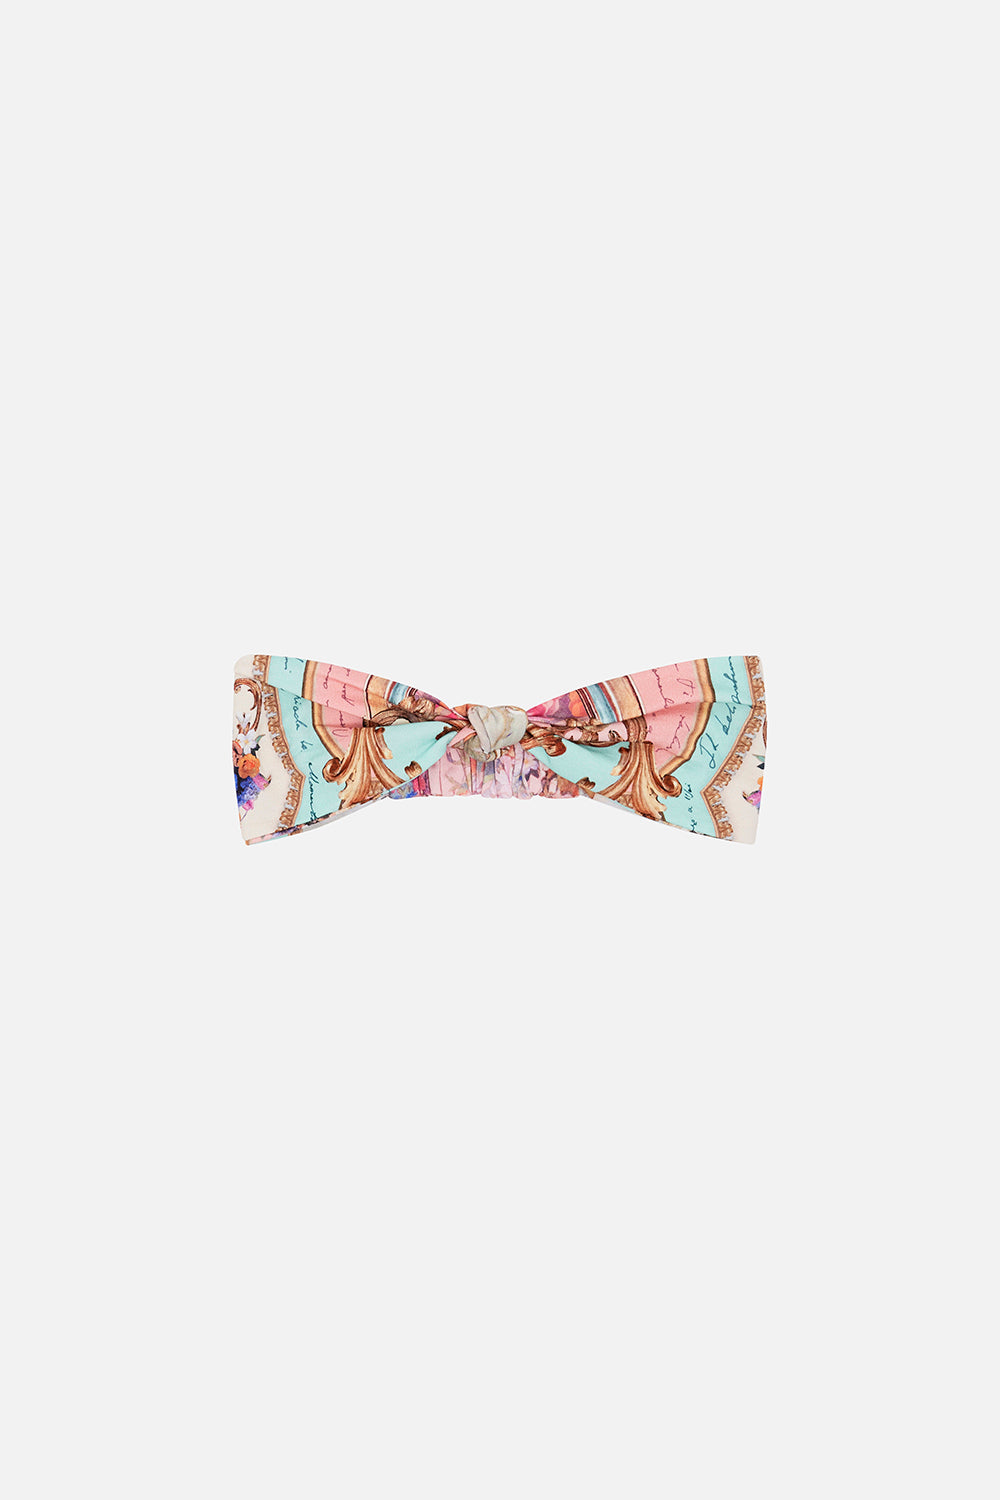 Product view of MILLA BY CAMILLA  kids headband in Letters From The Pink Room print